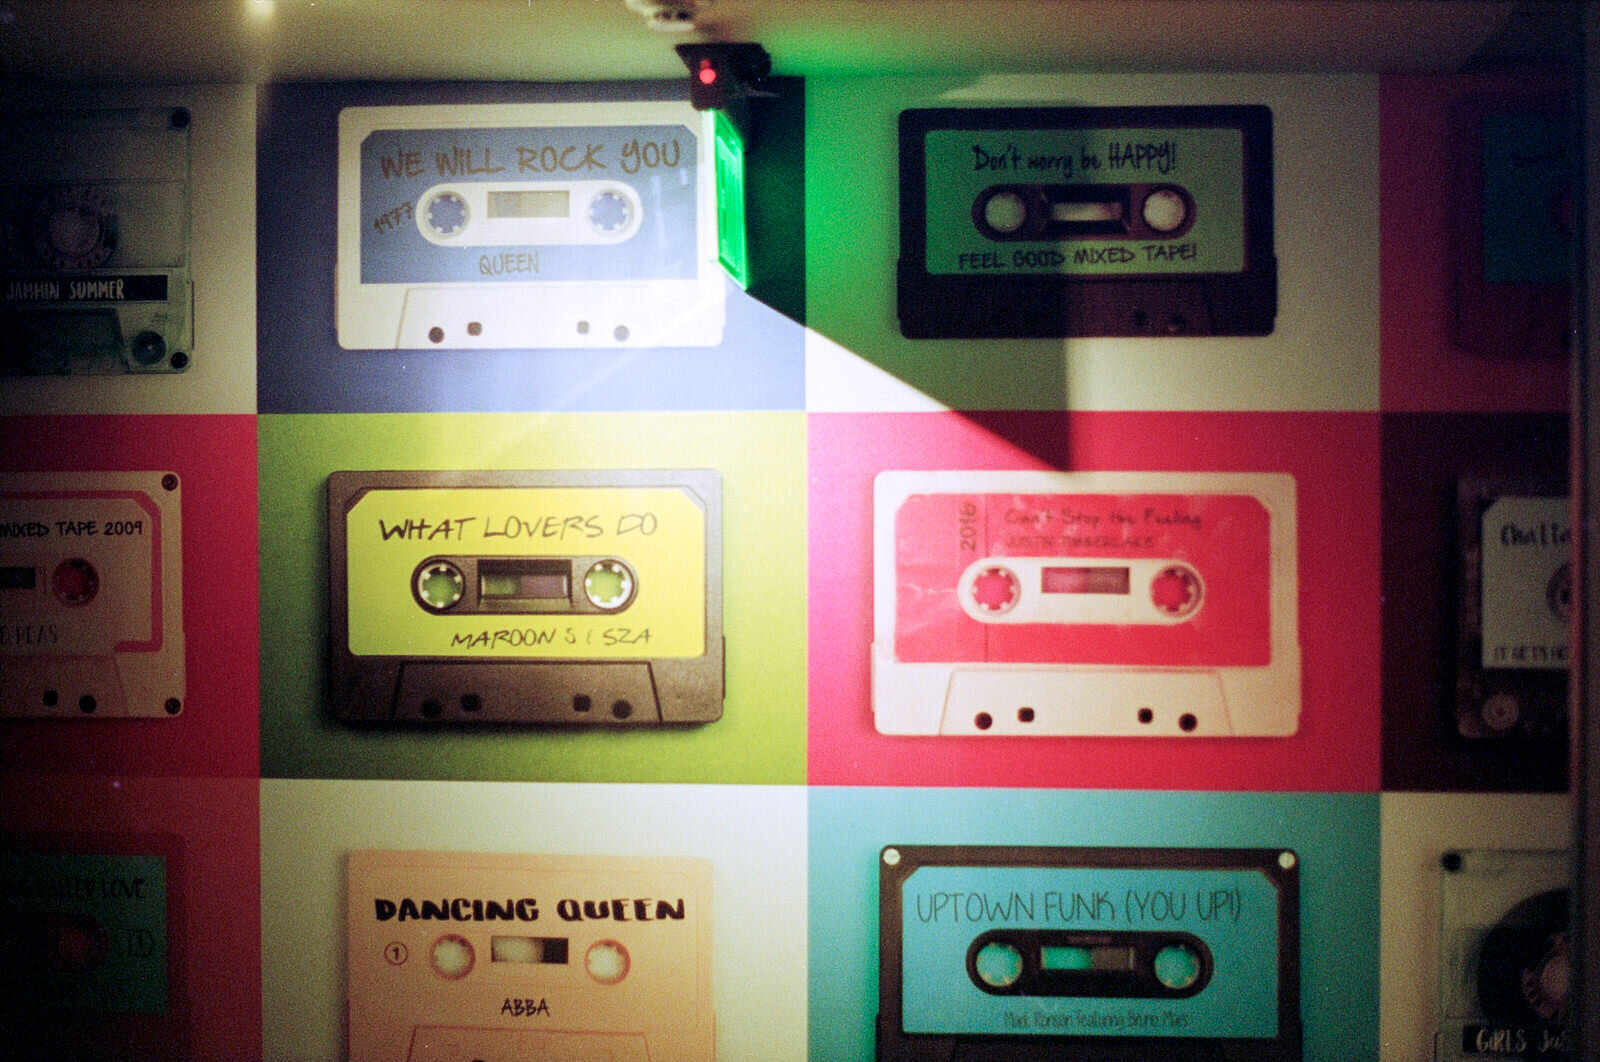 Oh, blast from our past...cassette tapes!